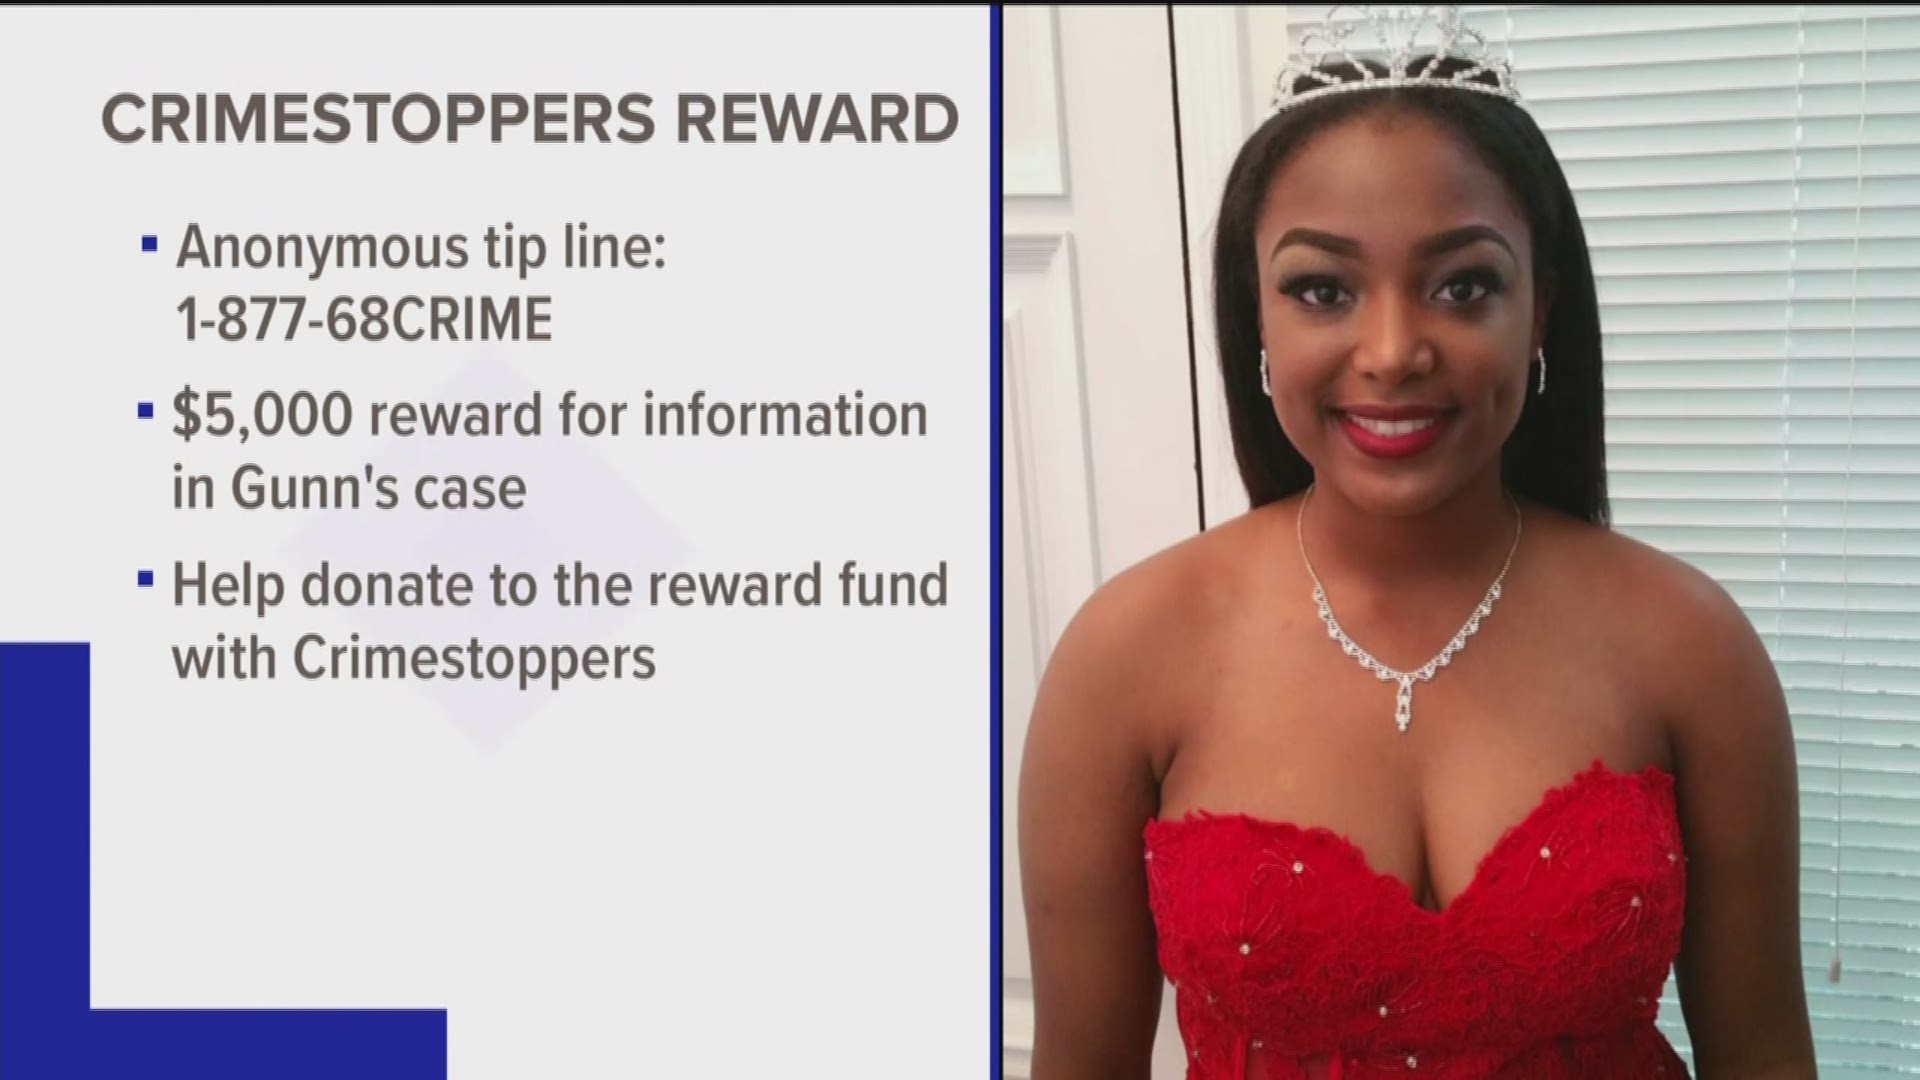 Anitra Gunn, a 23-year-old Fort Valley State University senior went missing around February 14. After a 2-day search, her body was found in Crawford County Tuesday.